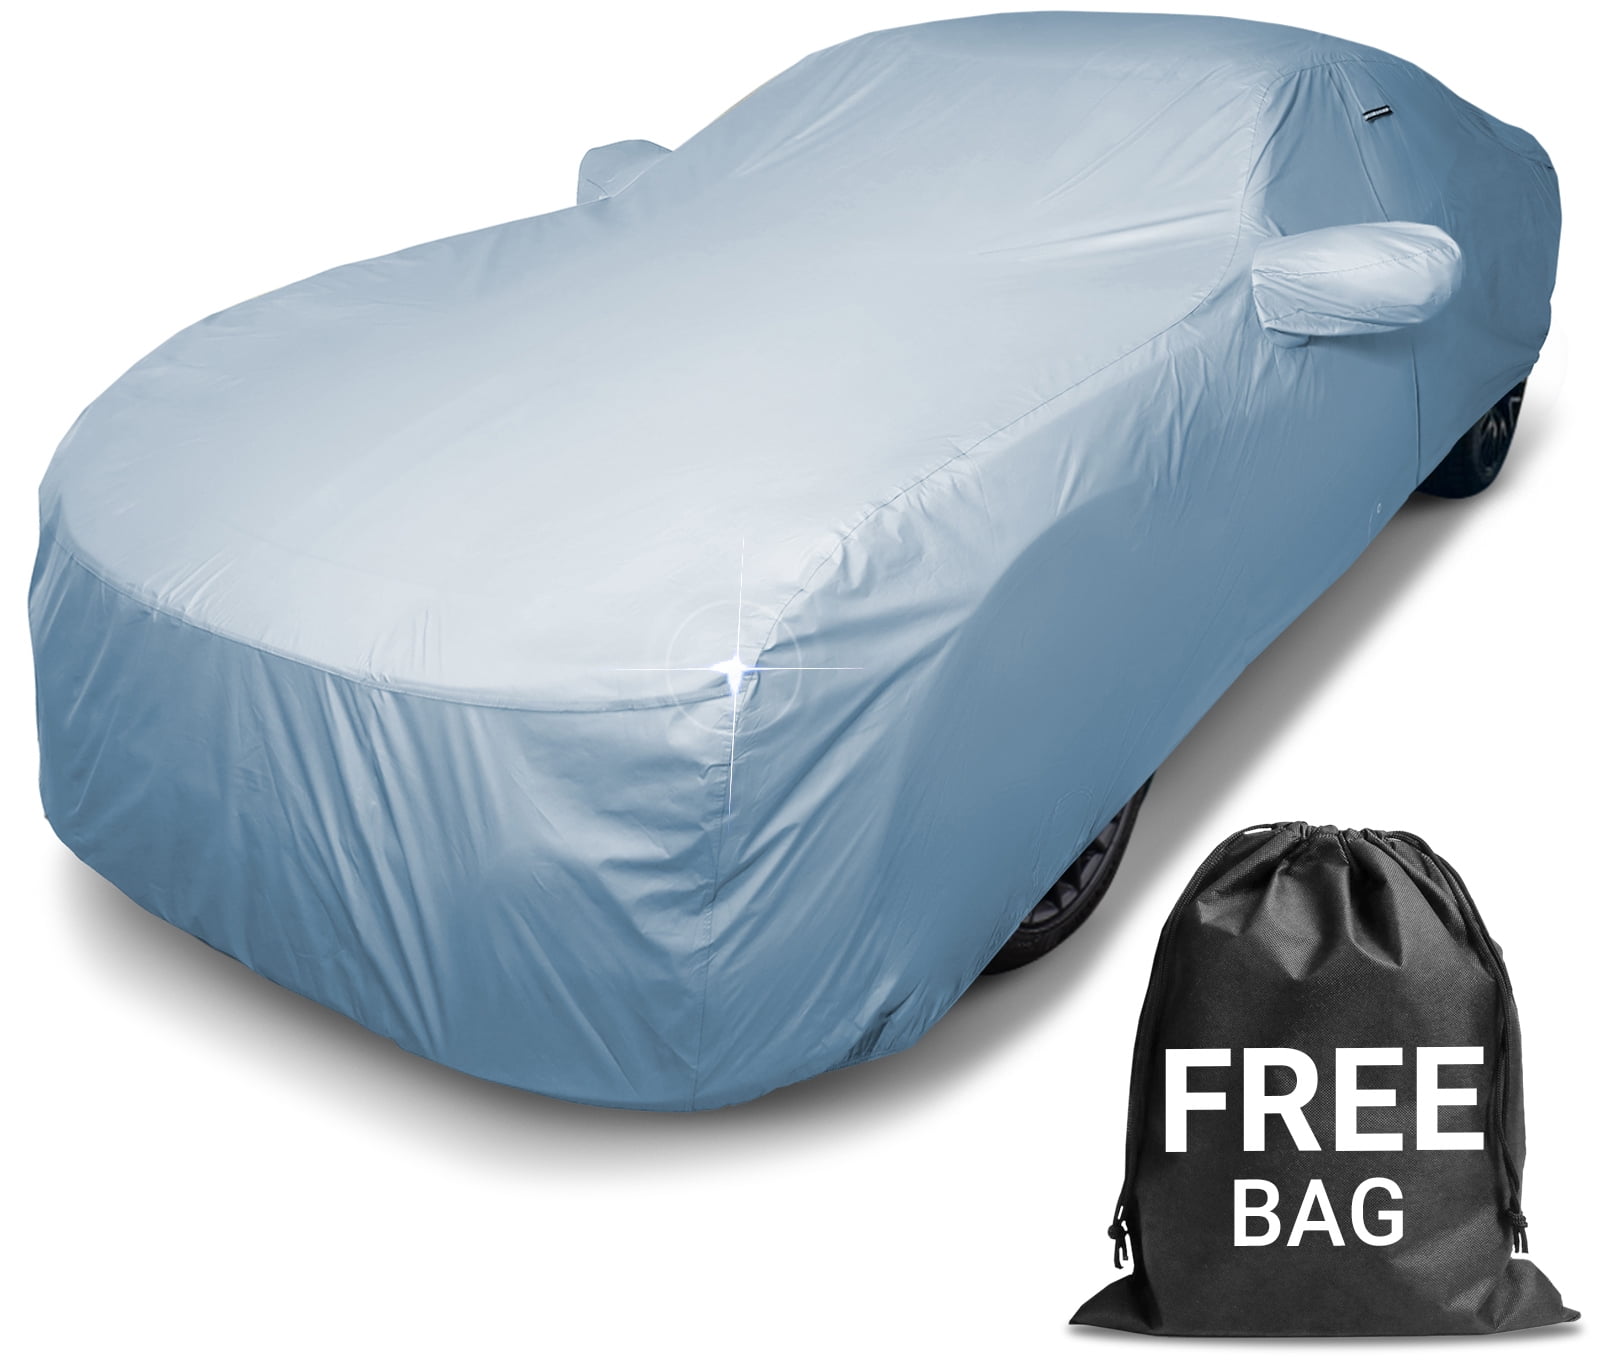 BMW 7-SERIES] CAR COVER - Ultimate Full Custom-Fit 100% All Weather  Protection